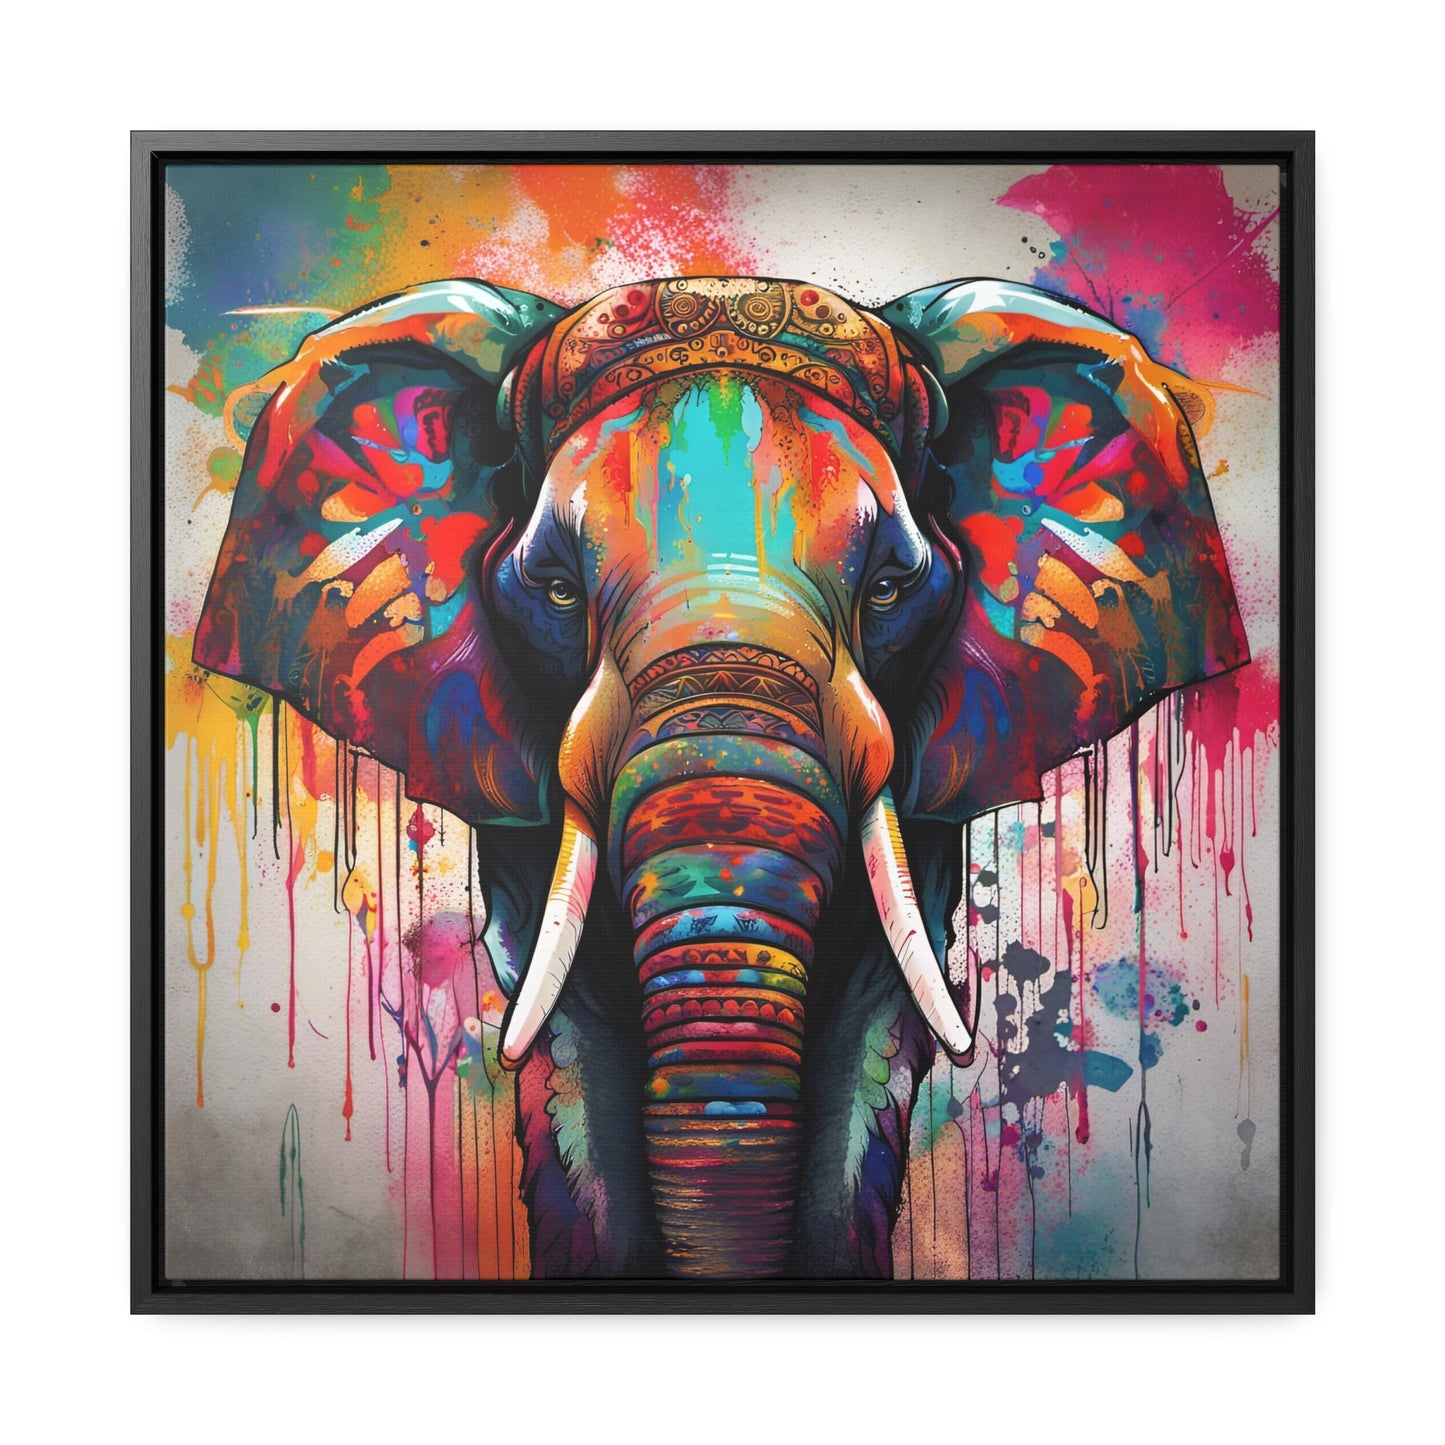 Elephant themed Wall Art Print - Dripping Colors Indian Elephant Print on Canvas in a Floating Frame